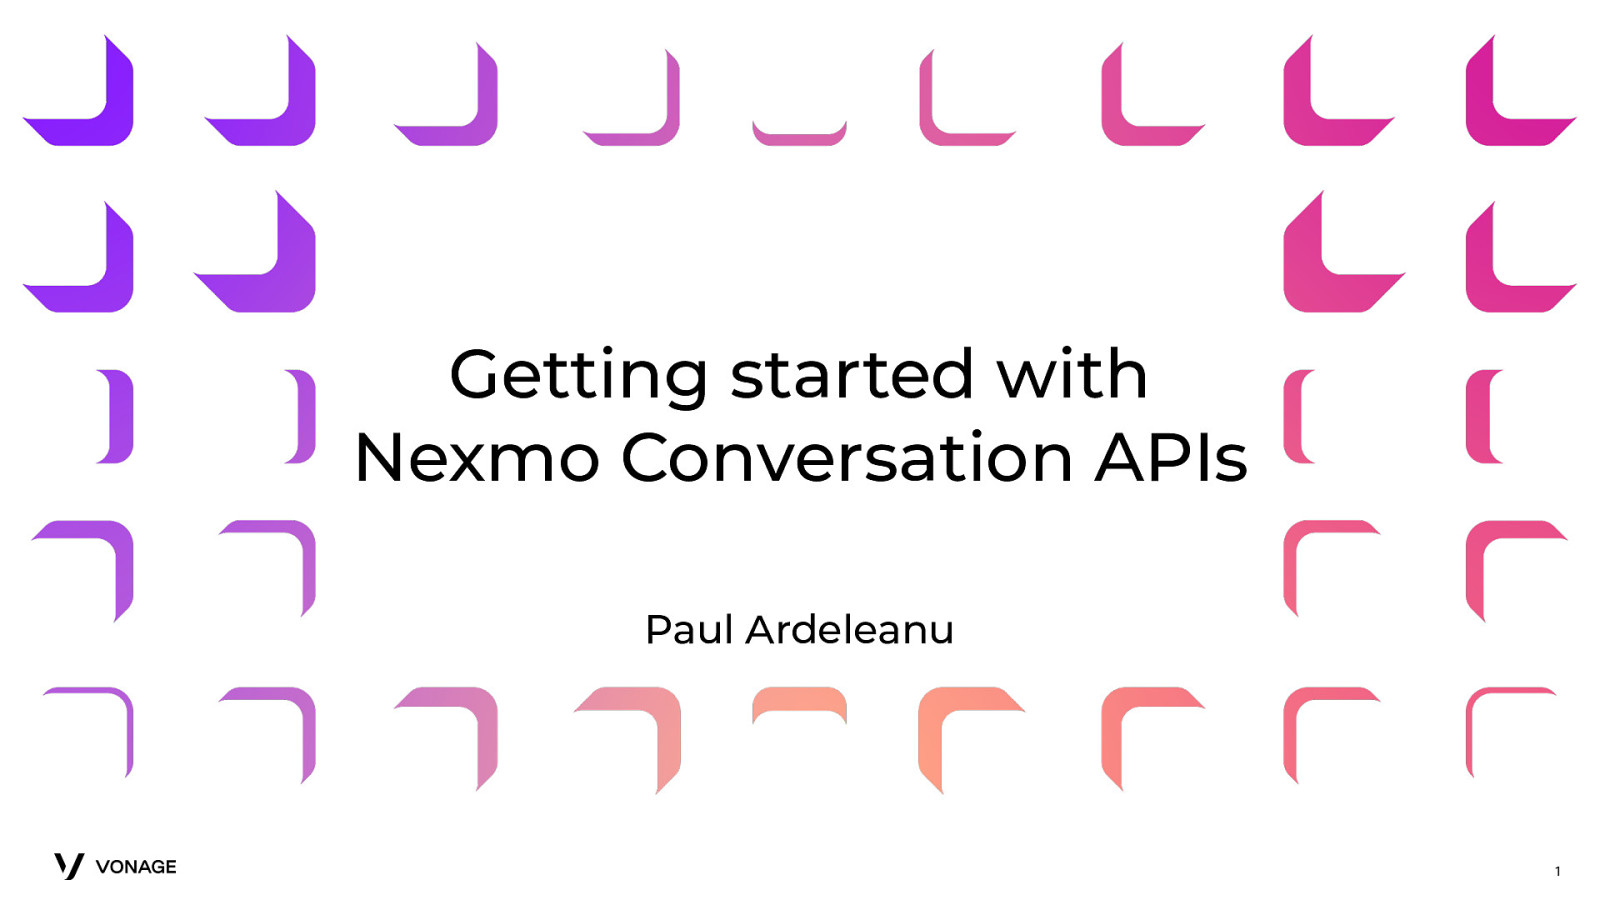 Getting started with Nexmo Conversation APIs